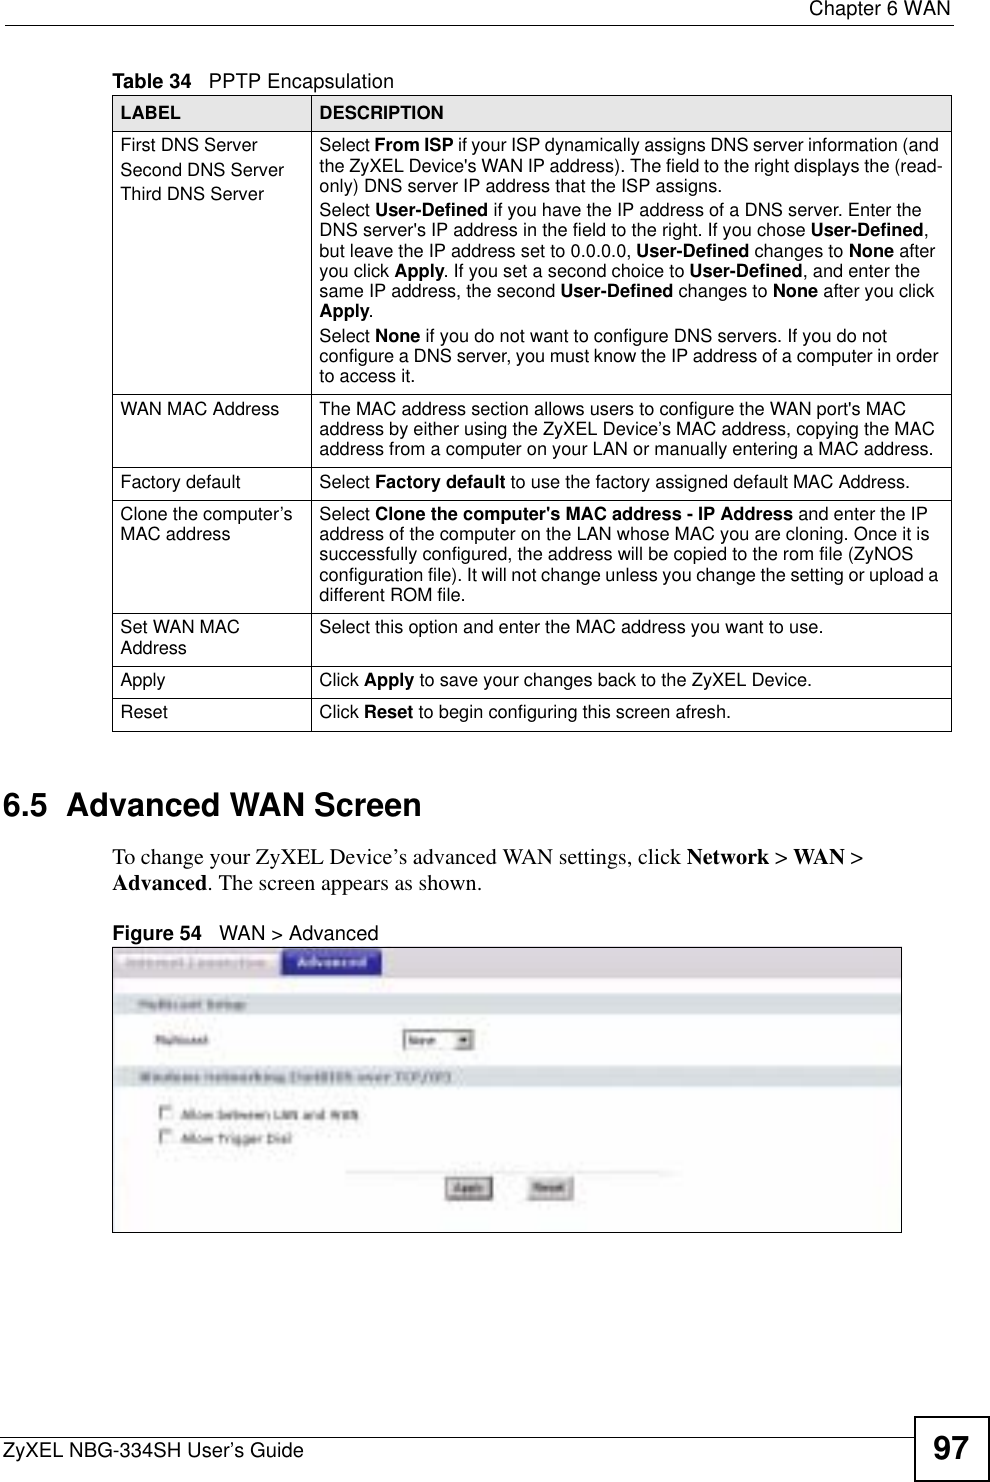  Chapter 6 WANZyXEL NBG-334SH User’s Guide 976.5  Advanced WAN ScreenTo change your ZyXEL Device’s advanced WAN settings, click Network &gt; WAN &gt; Advanced. The screen appears as shown.Figure 54   WAN &gt; AdvancedFirst DNS ServerSecond DNS ServerThird DNS Server Select From ISP if your ISP dynamically assigns DNS server information (and the ZyXEL Device&apos;s WAN IP address). The field to the right displays the (read-only) DNS server IP address that the ISP assigns. Select User-Defined if you have the IP address of a DNS server. Enter the DNS server&apos;s IP address in the field to the right. If you chose User-Defined,but leave the IP address set to 0.0.0.0, User-Defined changes to None after you click Apply. If you set a second choice to User-Defined, and enter the same IP address, the second User-Defined changes to None after you click Apply.Select None if you do not want to configure DNS servers. If you do not configure a DNS server, you must know the IP address of a computer in order to access it.WAN MAC Address The MAC address section allows users to configure the WAN port&apos;s MAC address by either using the ZyXEL Device’s MAC address, copying the MAC address from a computer on your LAN or manually entering a MAC address. Factory default Select Factory default to use the factory assigned default MAC Address.Clone the computer’s MAC address Select Clone the computer&apos;s MAC address - IP Address and enter the IP address of the computer on the LAN whose MAC you are cloning. Once it is successfully configured, the address will be copied to the rom file (ZyNOS configuration file). It will not change unless you change the setting or upload a different ROM file. Set WAN MAC Address Select this option and enter the MAC address you want to use.Apply Click Apply to save your changes back to the ZyXEL Device.Reset Click Reset to begin configuring this screen afresh.Table 34   PPTP EncapsulationLABEL DESCRIPTION